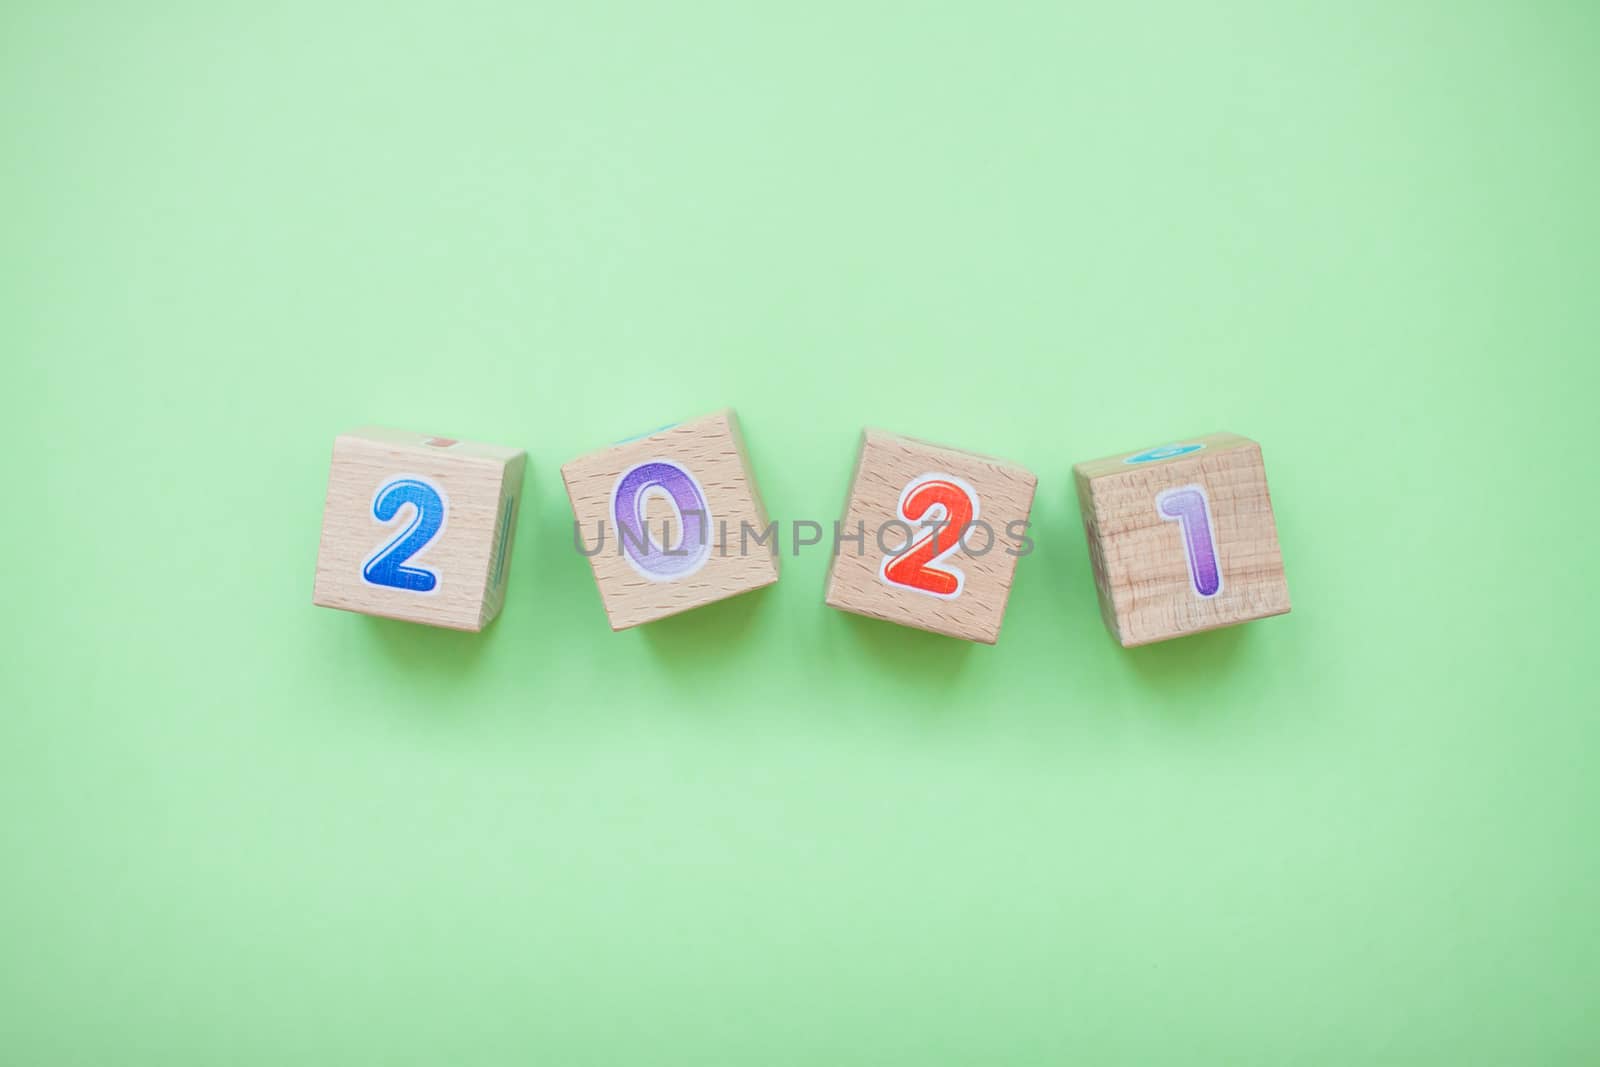 Happy New year 2021 celebration. The inscription 2021 from children's educational wooden cubes on a green background